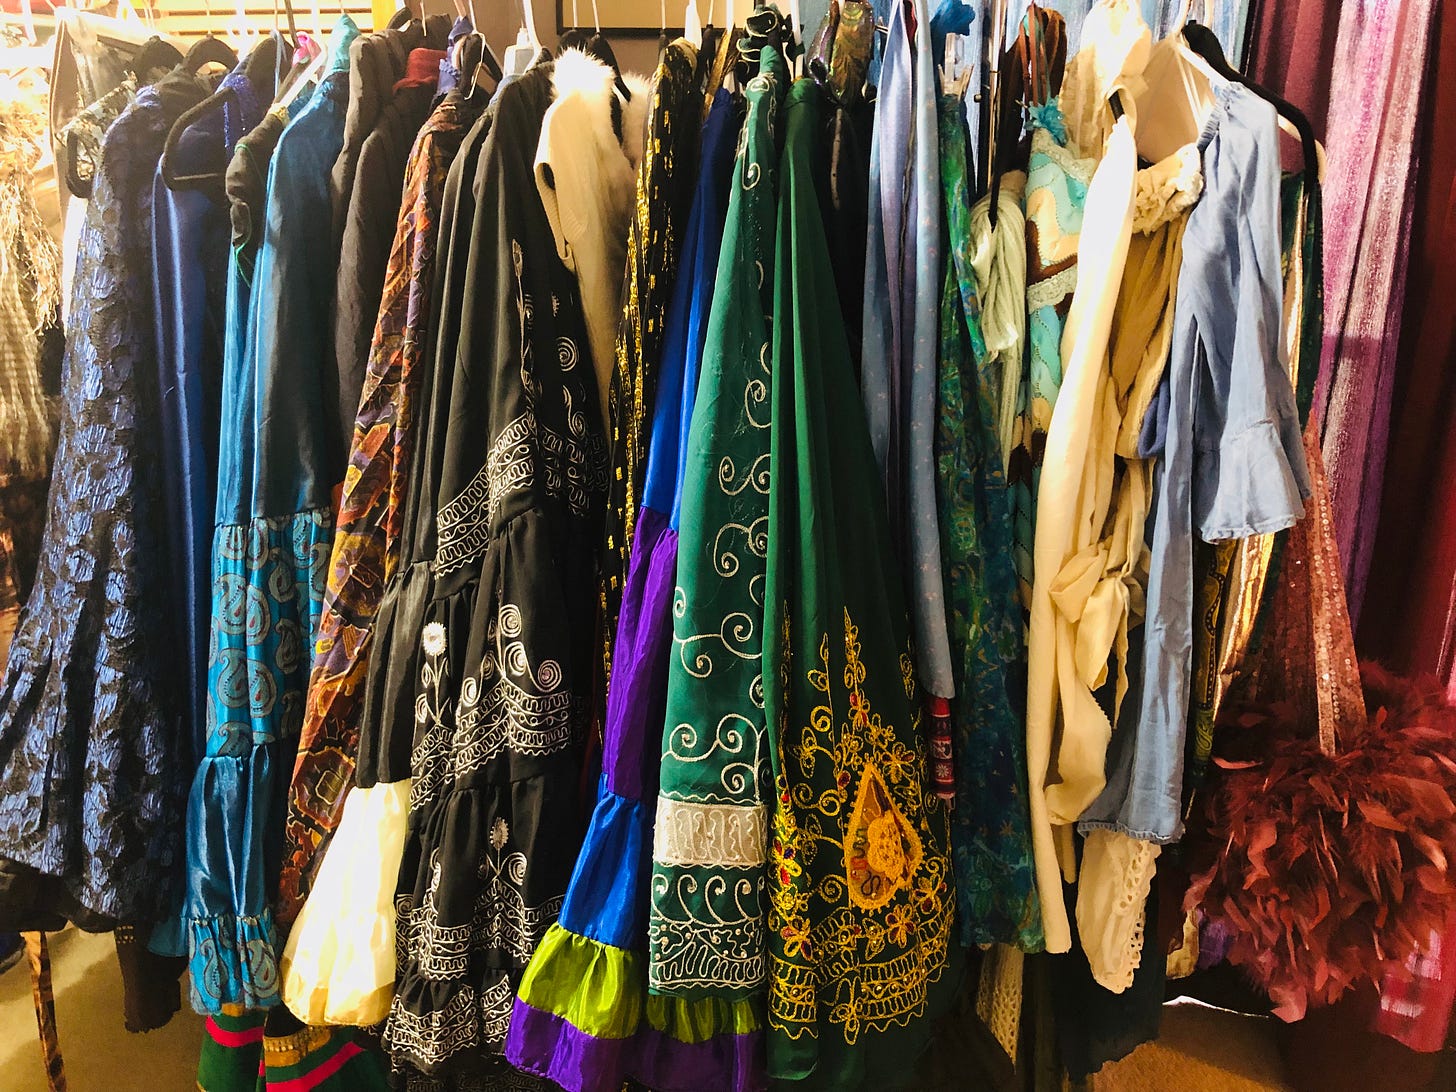 Free standing clothes rack stuffed with a rainbow of embroidered skirts, fancy shirts, and feather-laden extravaganzas.